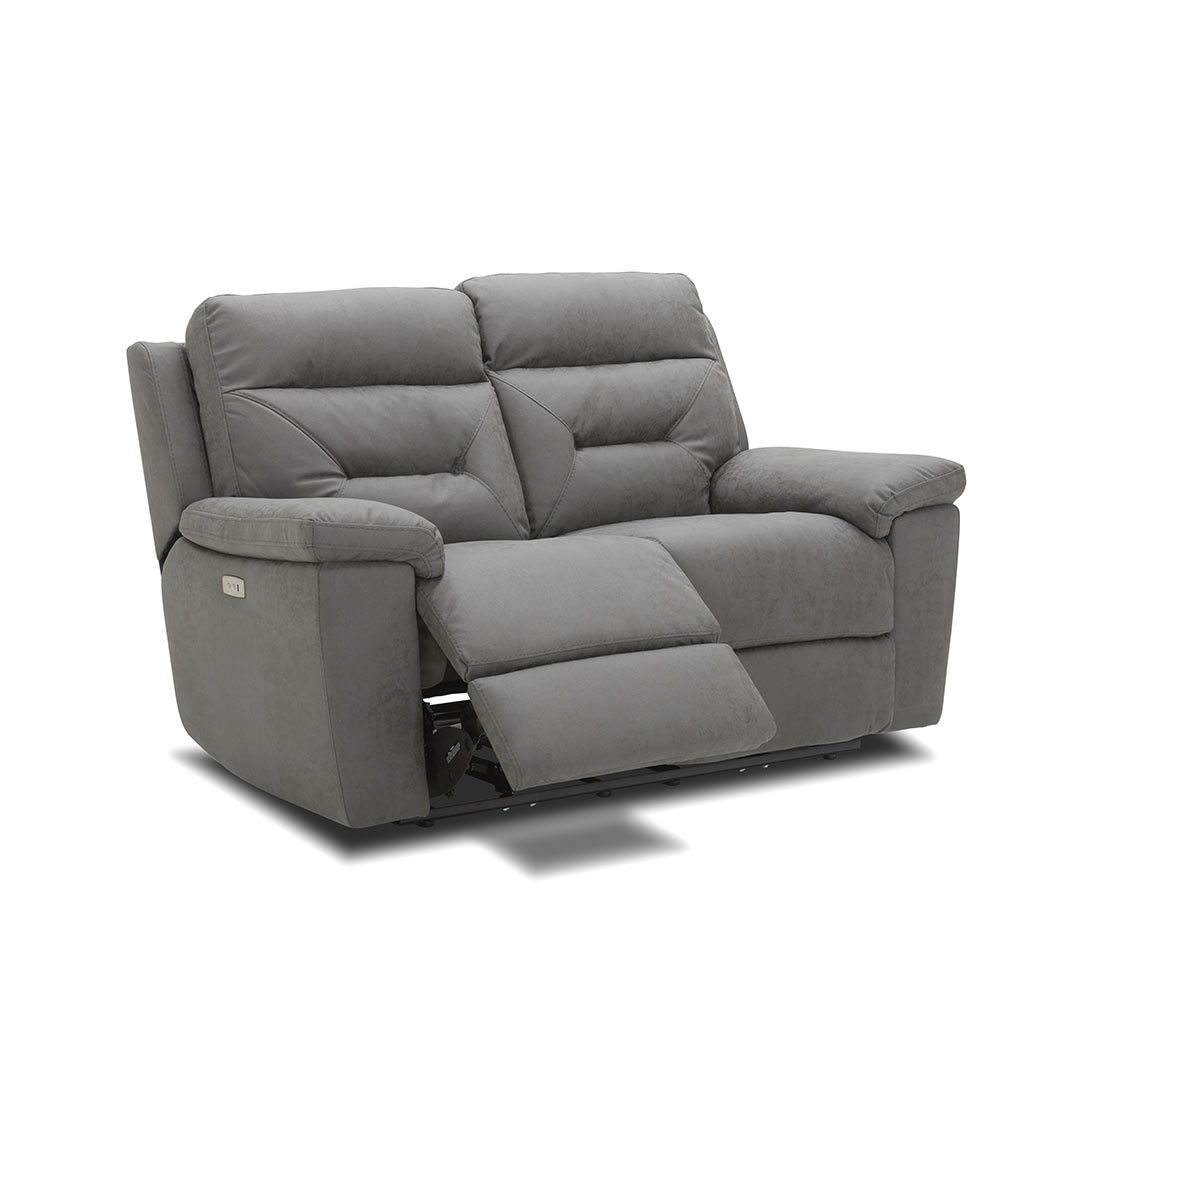 Cut out image of Kuka Grey Fabric Reclining 2 Seater Sofa while reclined